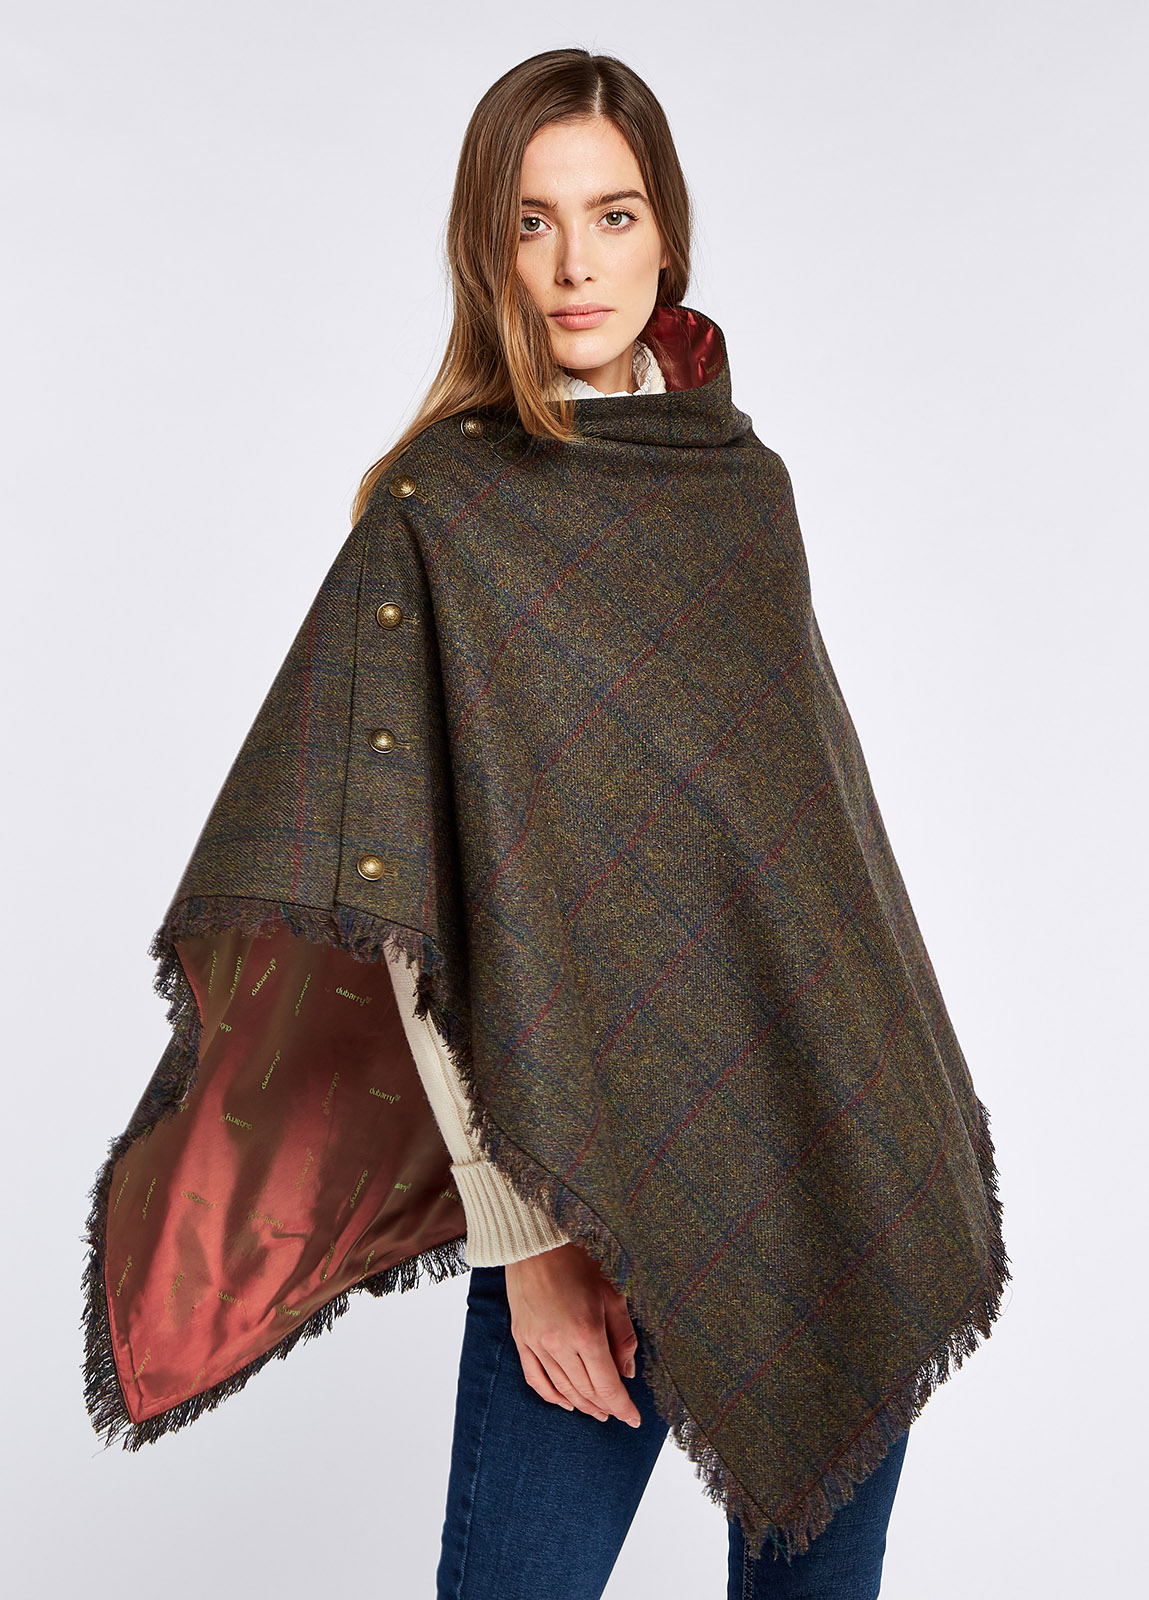 Woman modelling Hazelwood Tweed Hemlock Poncho from an angle with functional button detail on one side and fabric fringe. 